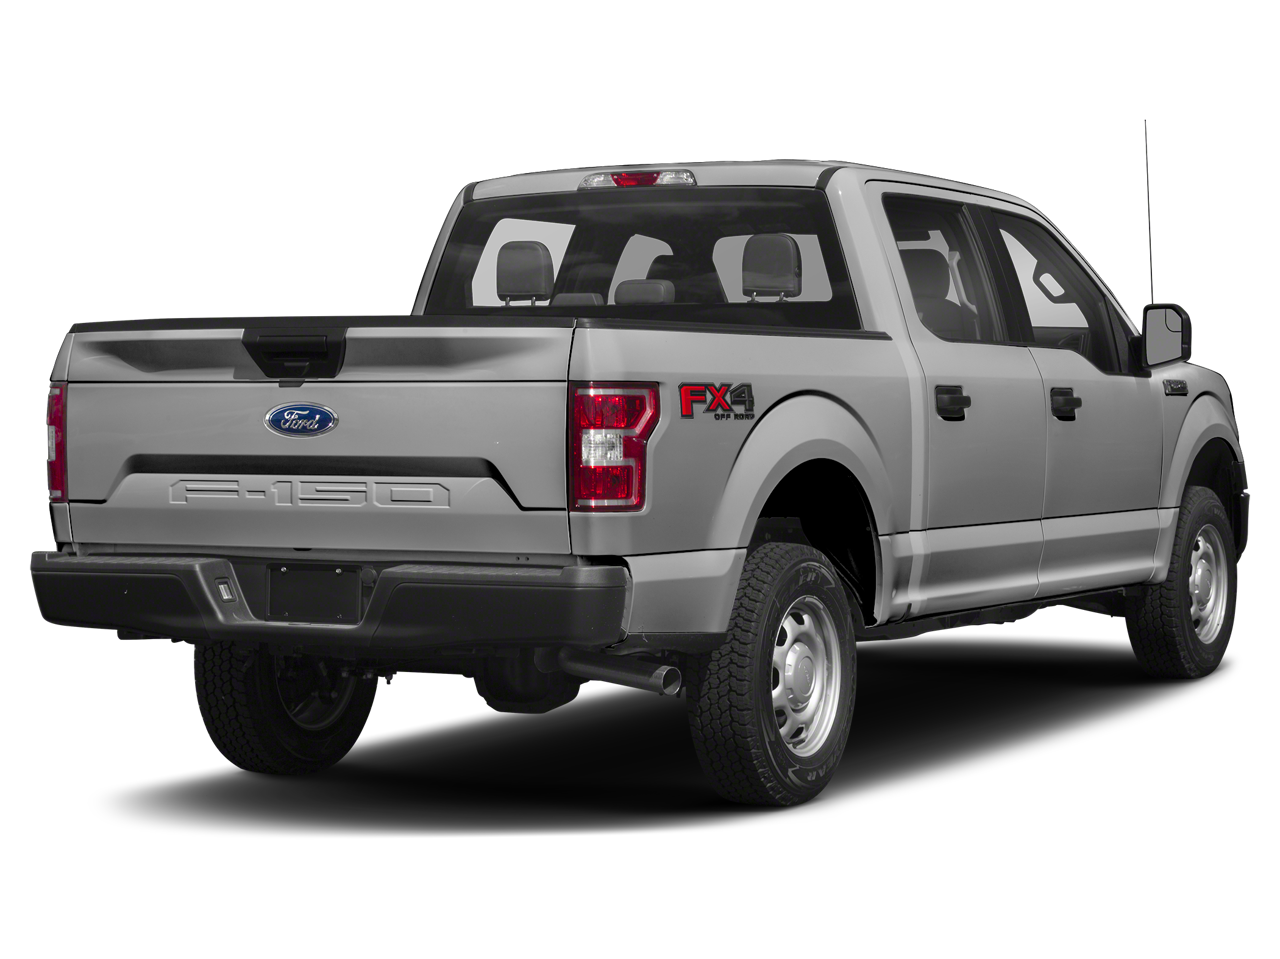 2019 Ford F-150 XLT Trailer tow package Heavy-duty payload package